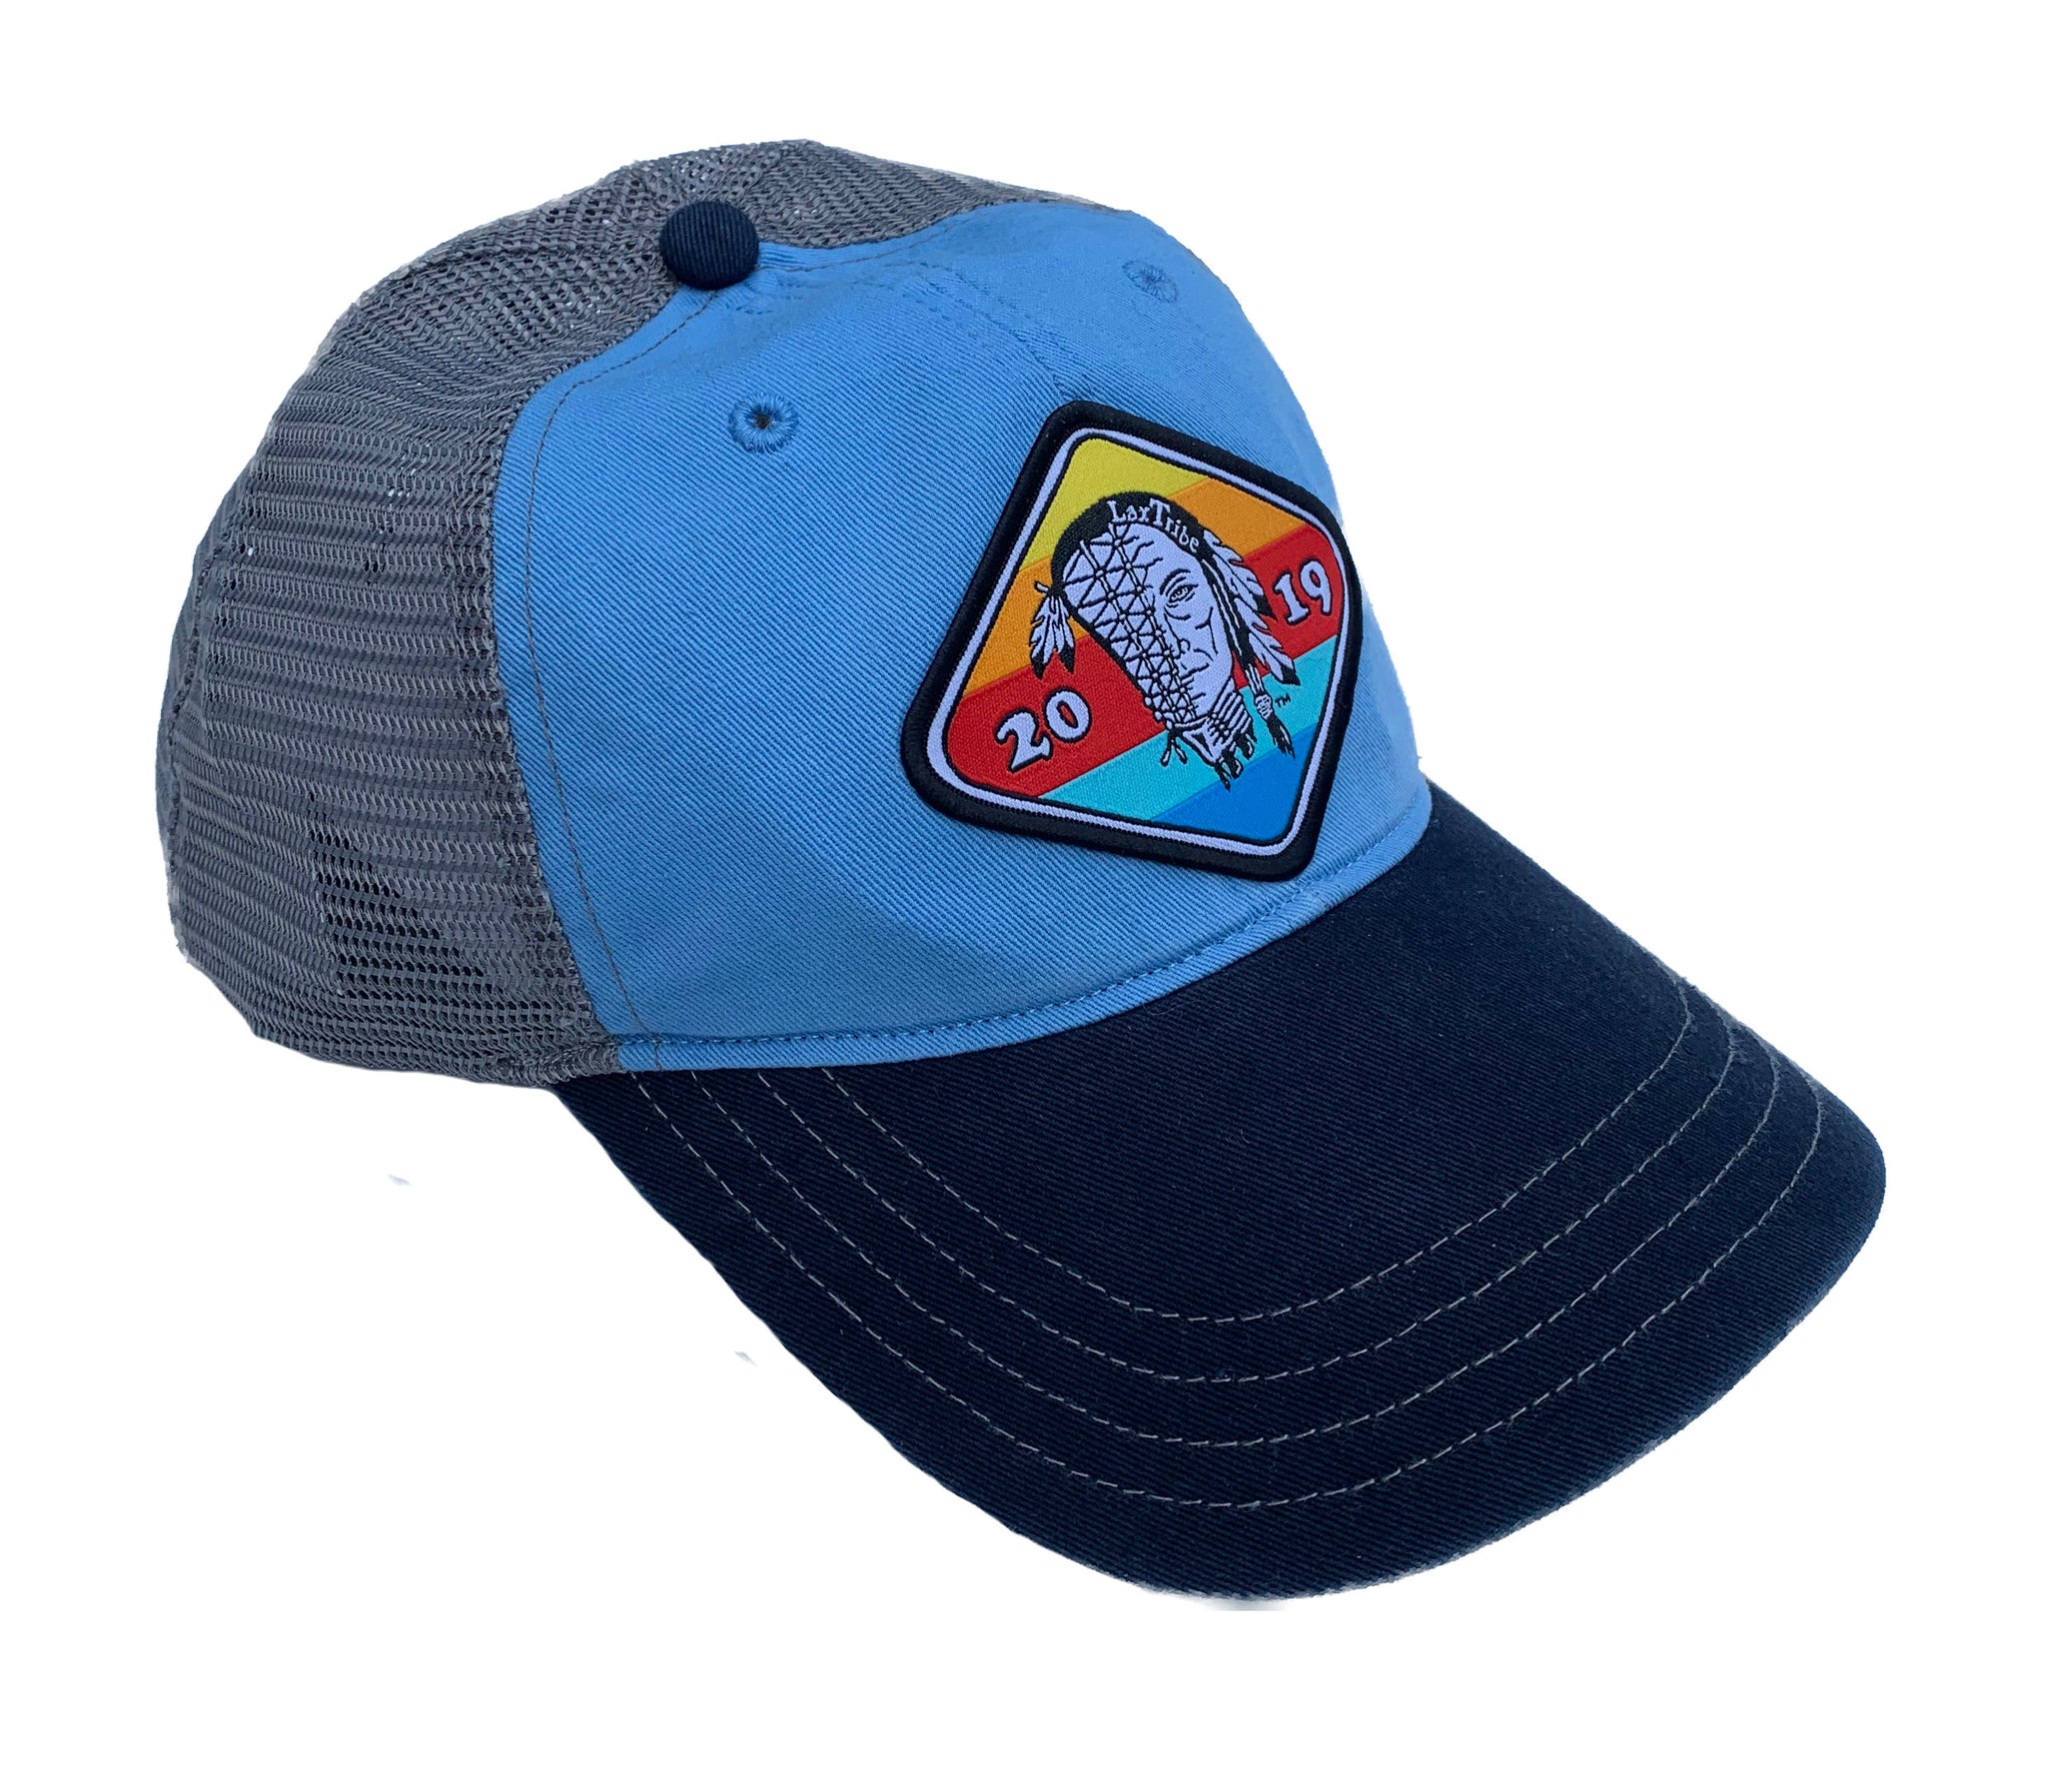 Hat - Richardson's R111 - "Sunset" Patch Washed Trucker